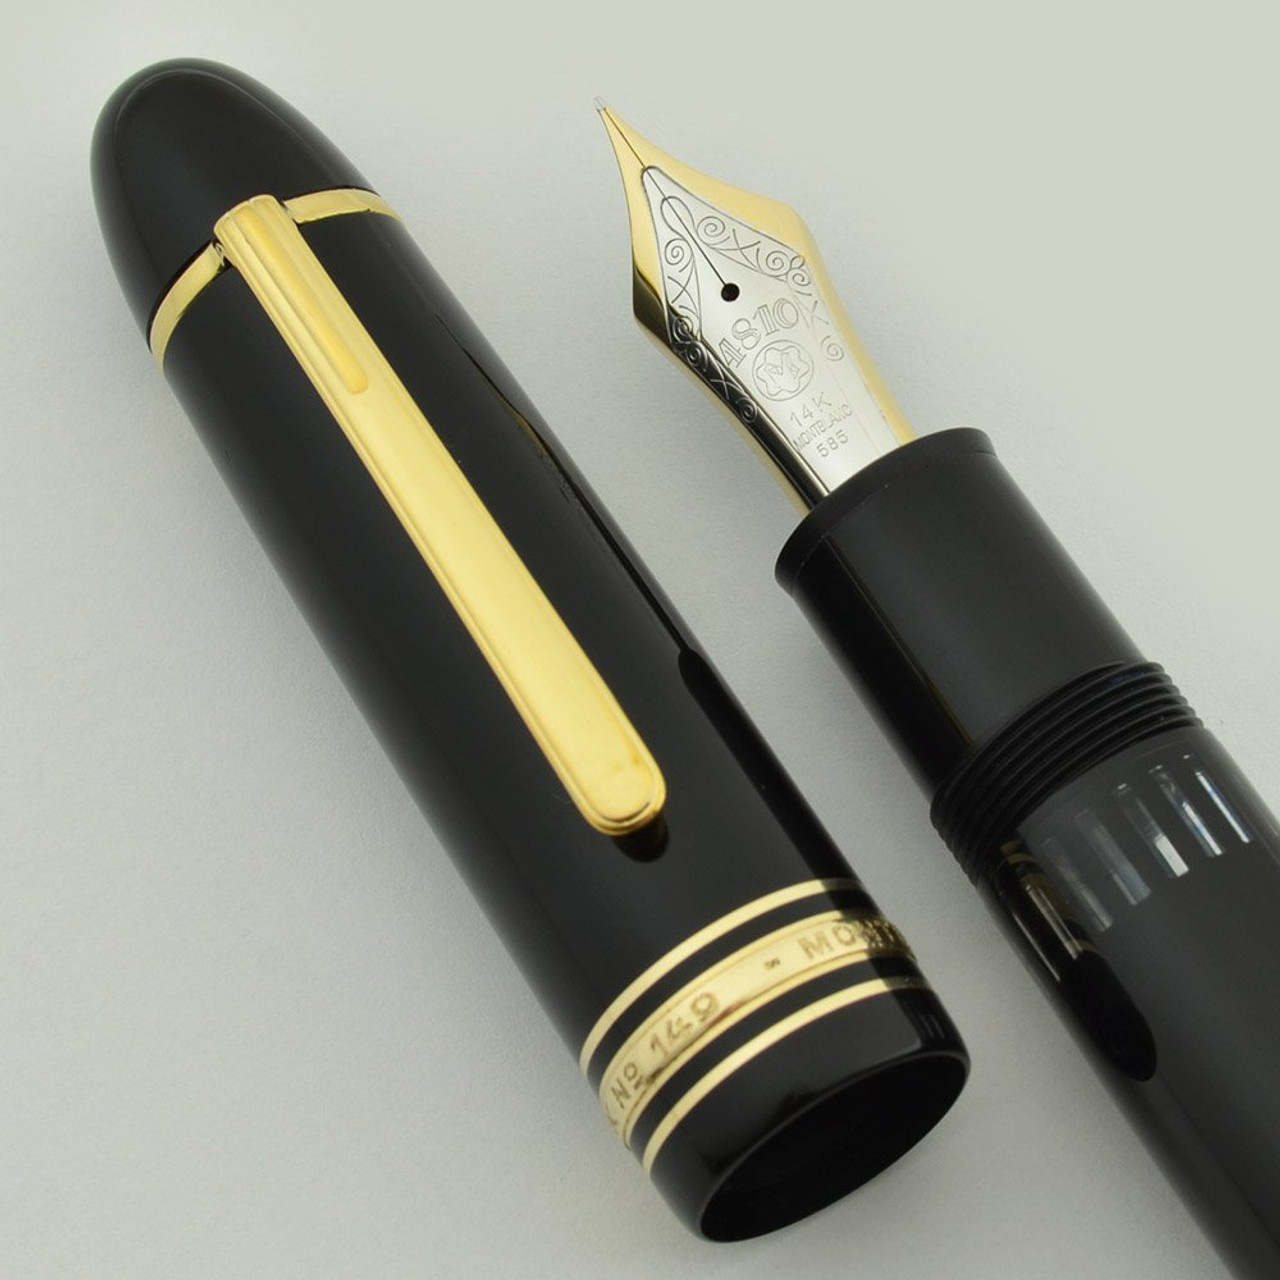 Montblanc Meisterstuck 149 Fountain Pen - 1980s, Basic Black, Piston Fill, 14k Extra Fine Nib (Excellent + in Box, Works Well)